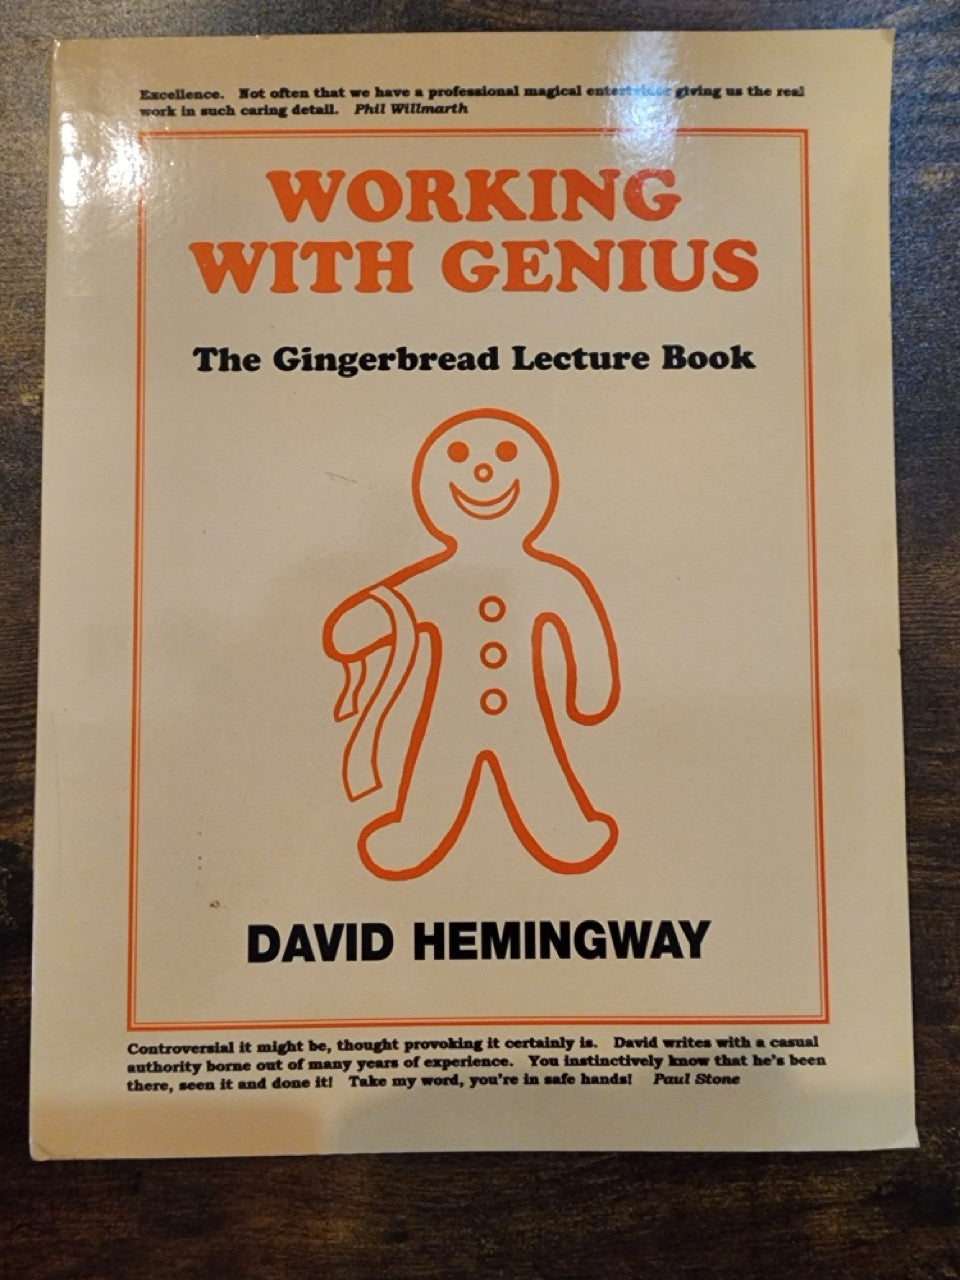 Working With Genius: The Gingerbread Lecture Book - David Hemingway